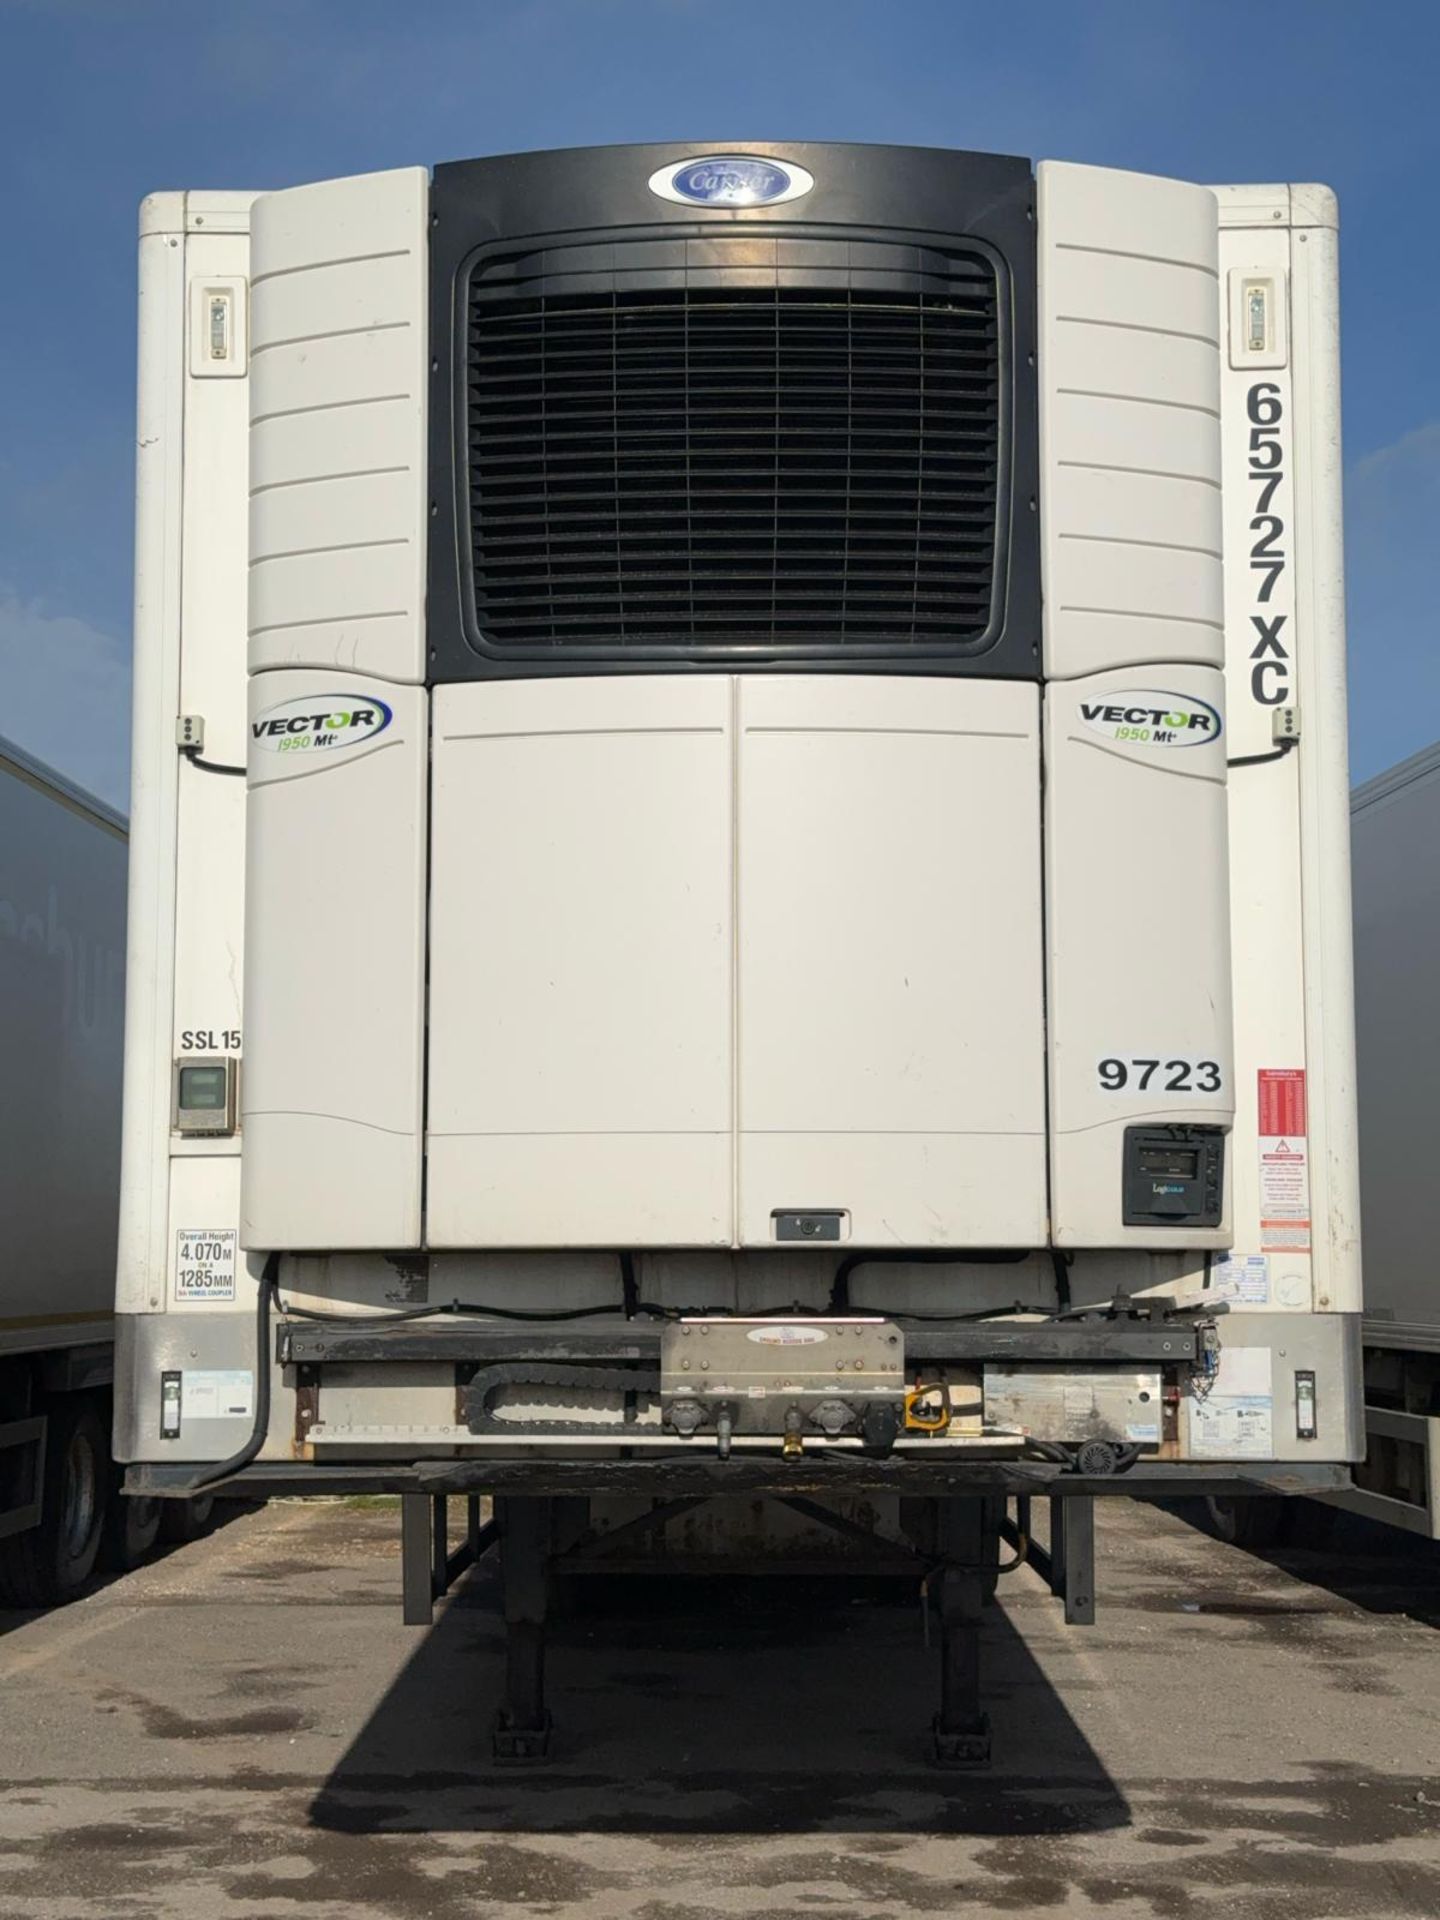 65727XC – 2015 Montracon 13.6m Refrigerated Trailer - Image 10 of 11